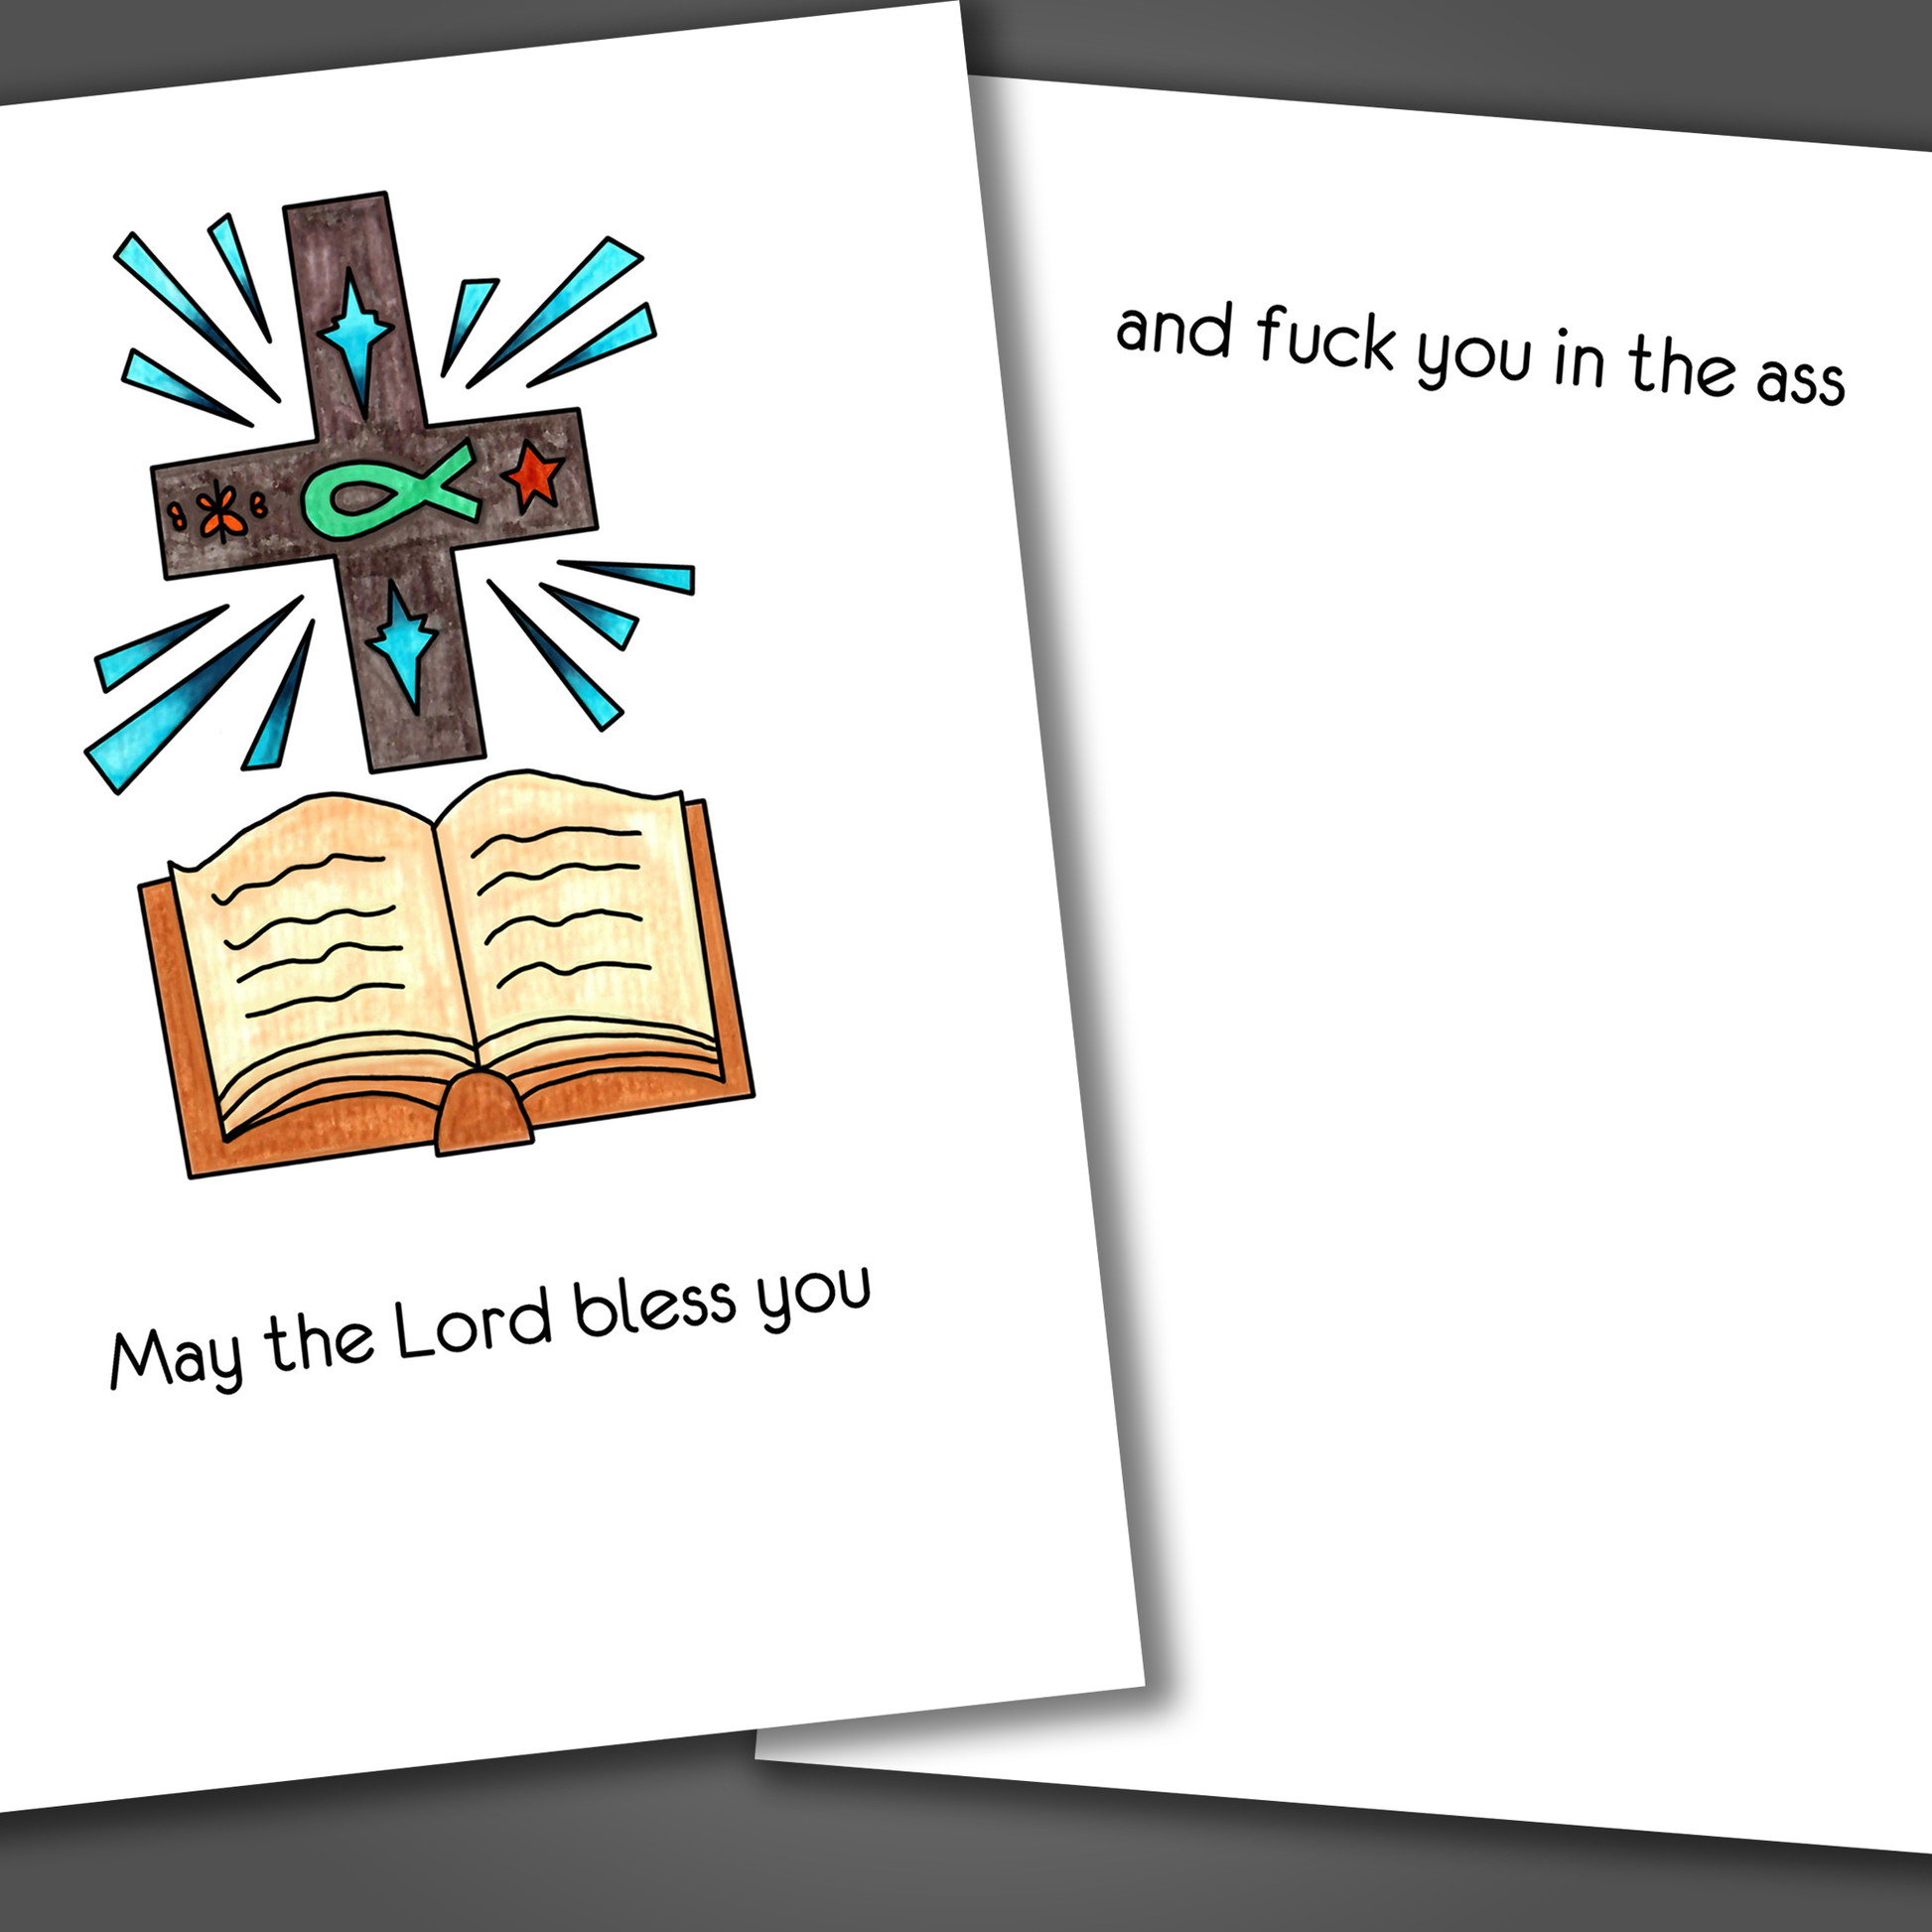 Funny encouragement card with a cross and religious book drawn on the front of the card. Inside the card is a funny joke that says may the Lord bless you and fuck you in the ass.